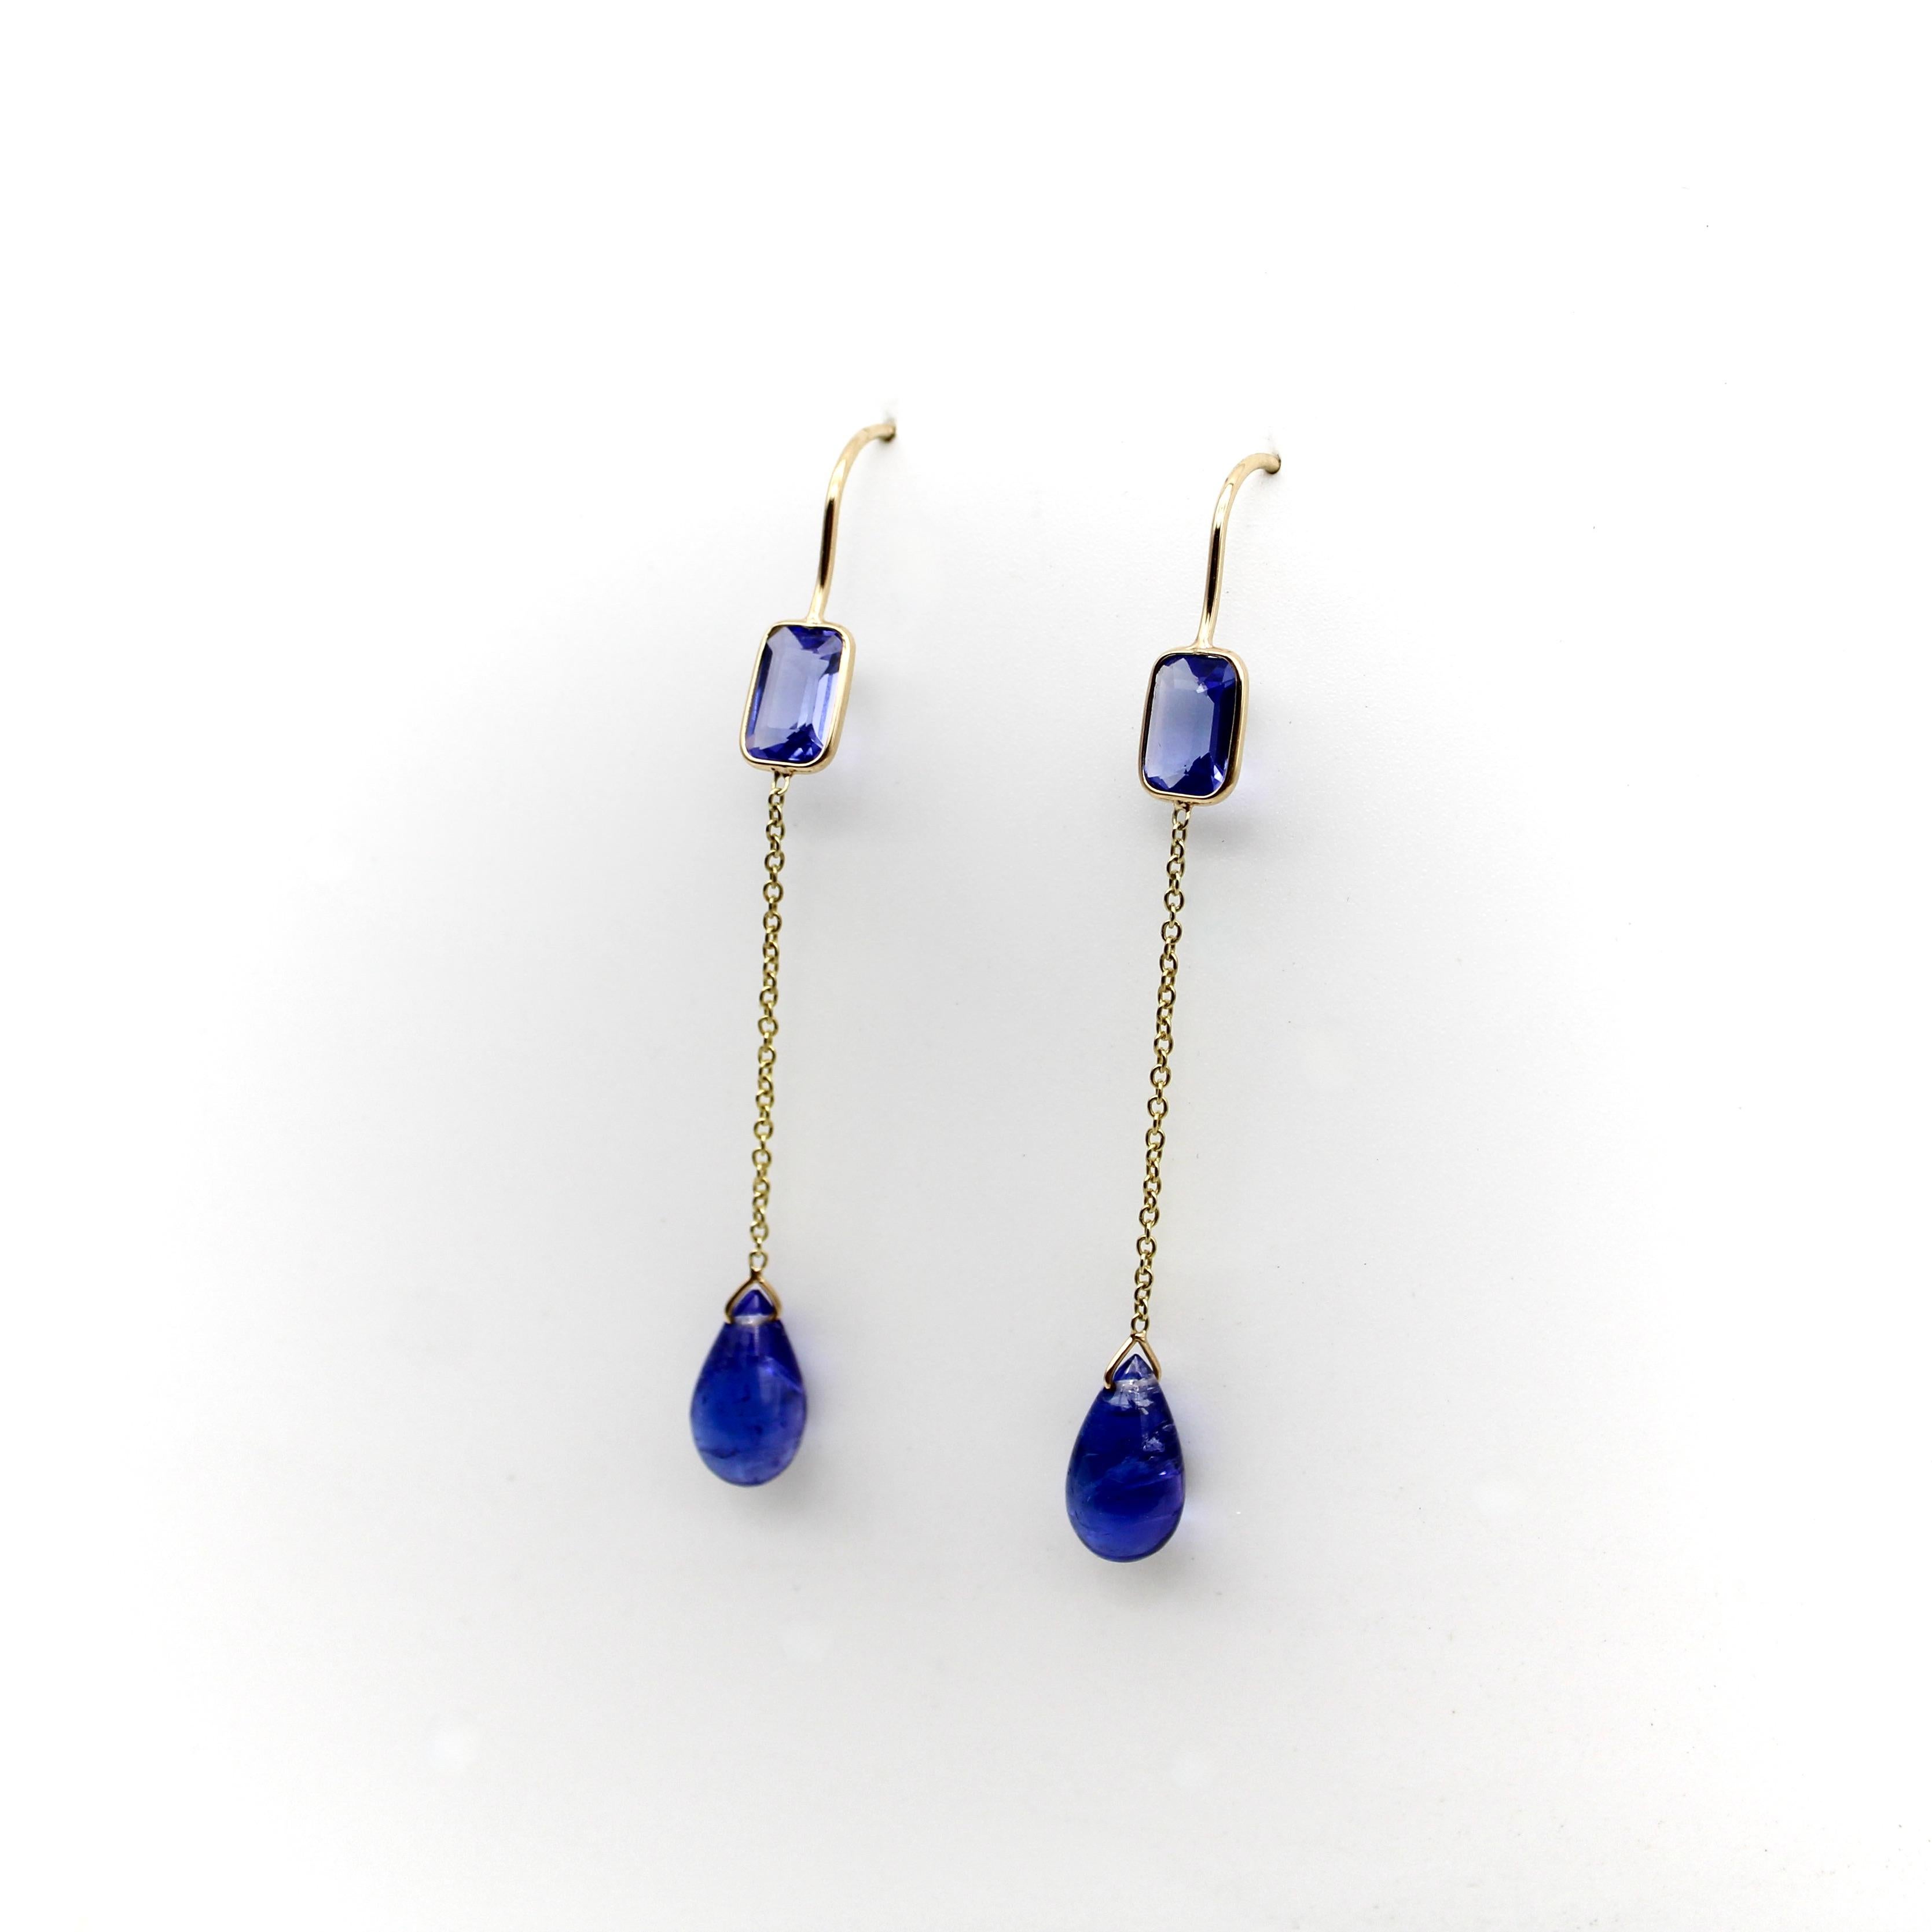 Stunning blue tanzanites are set in 18k gold, with an emerald cut stone at the top and a teardrop shaped stone dangling from a delicate piece of gold chain. The tanzanites are a beautiful blue with purple undertones, rich and saturated, yet with a